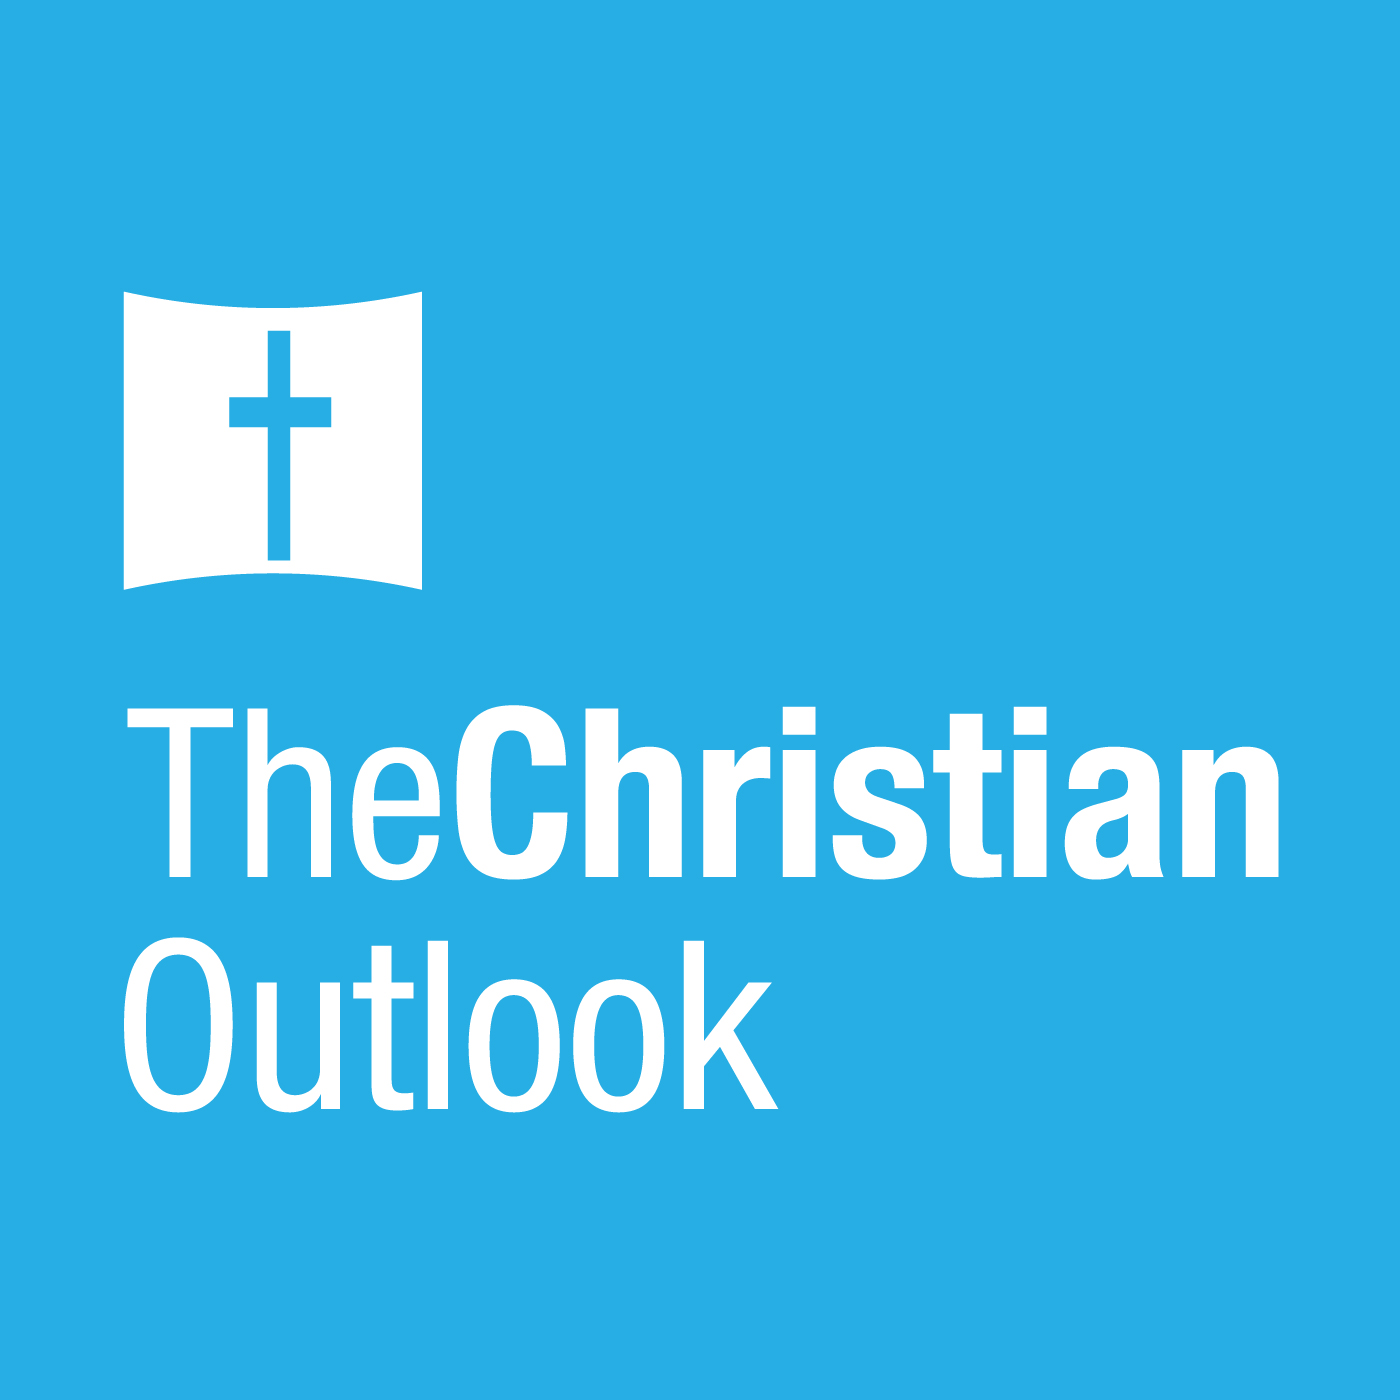 Christian Outlook 9/19/15: The Largest Displacement of People in Human History Since WWII